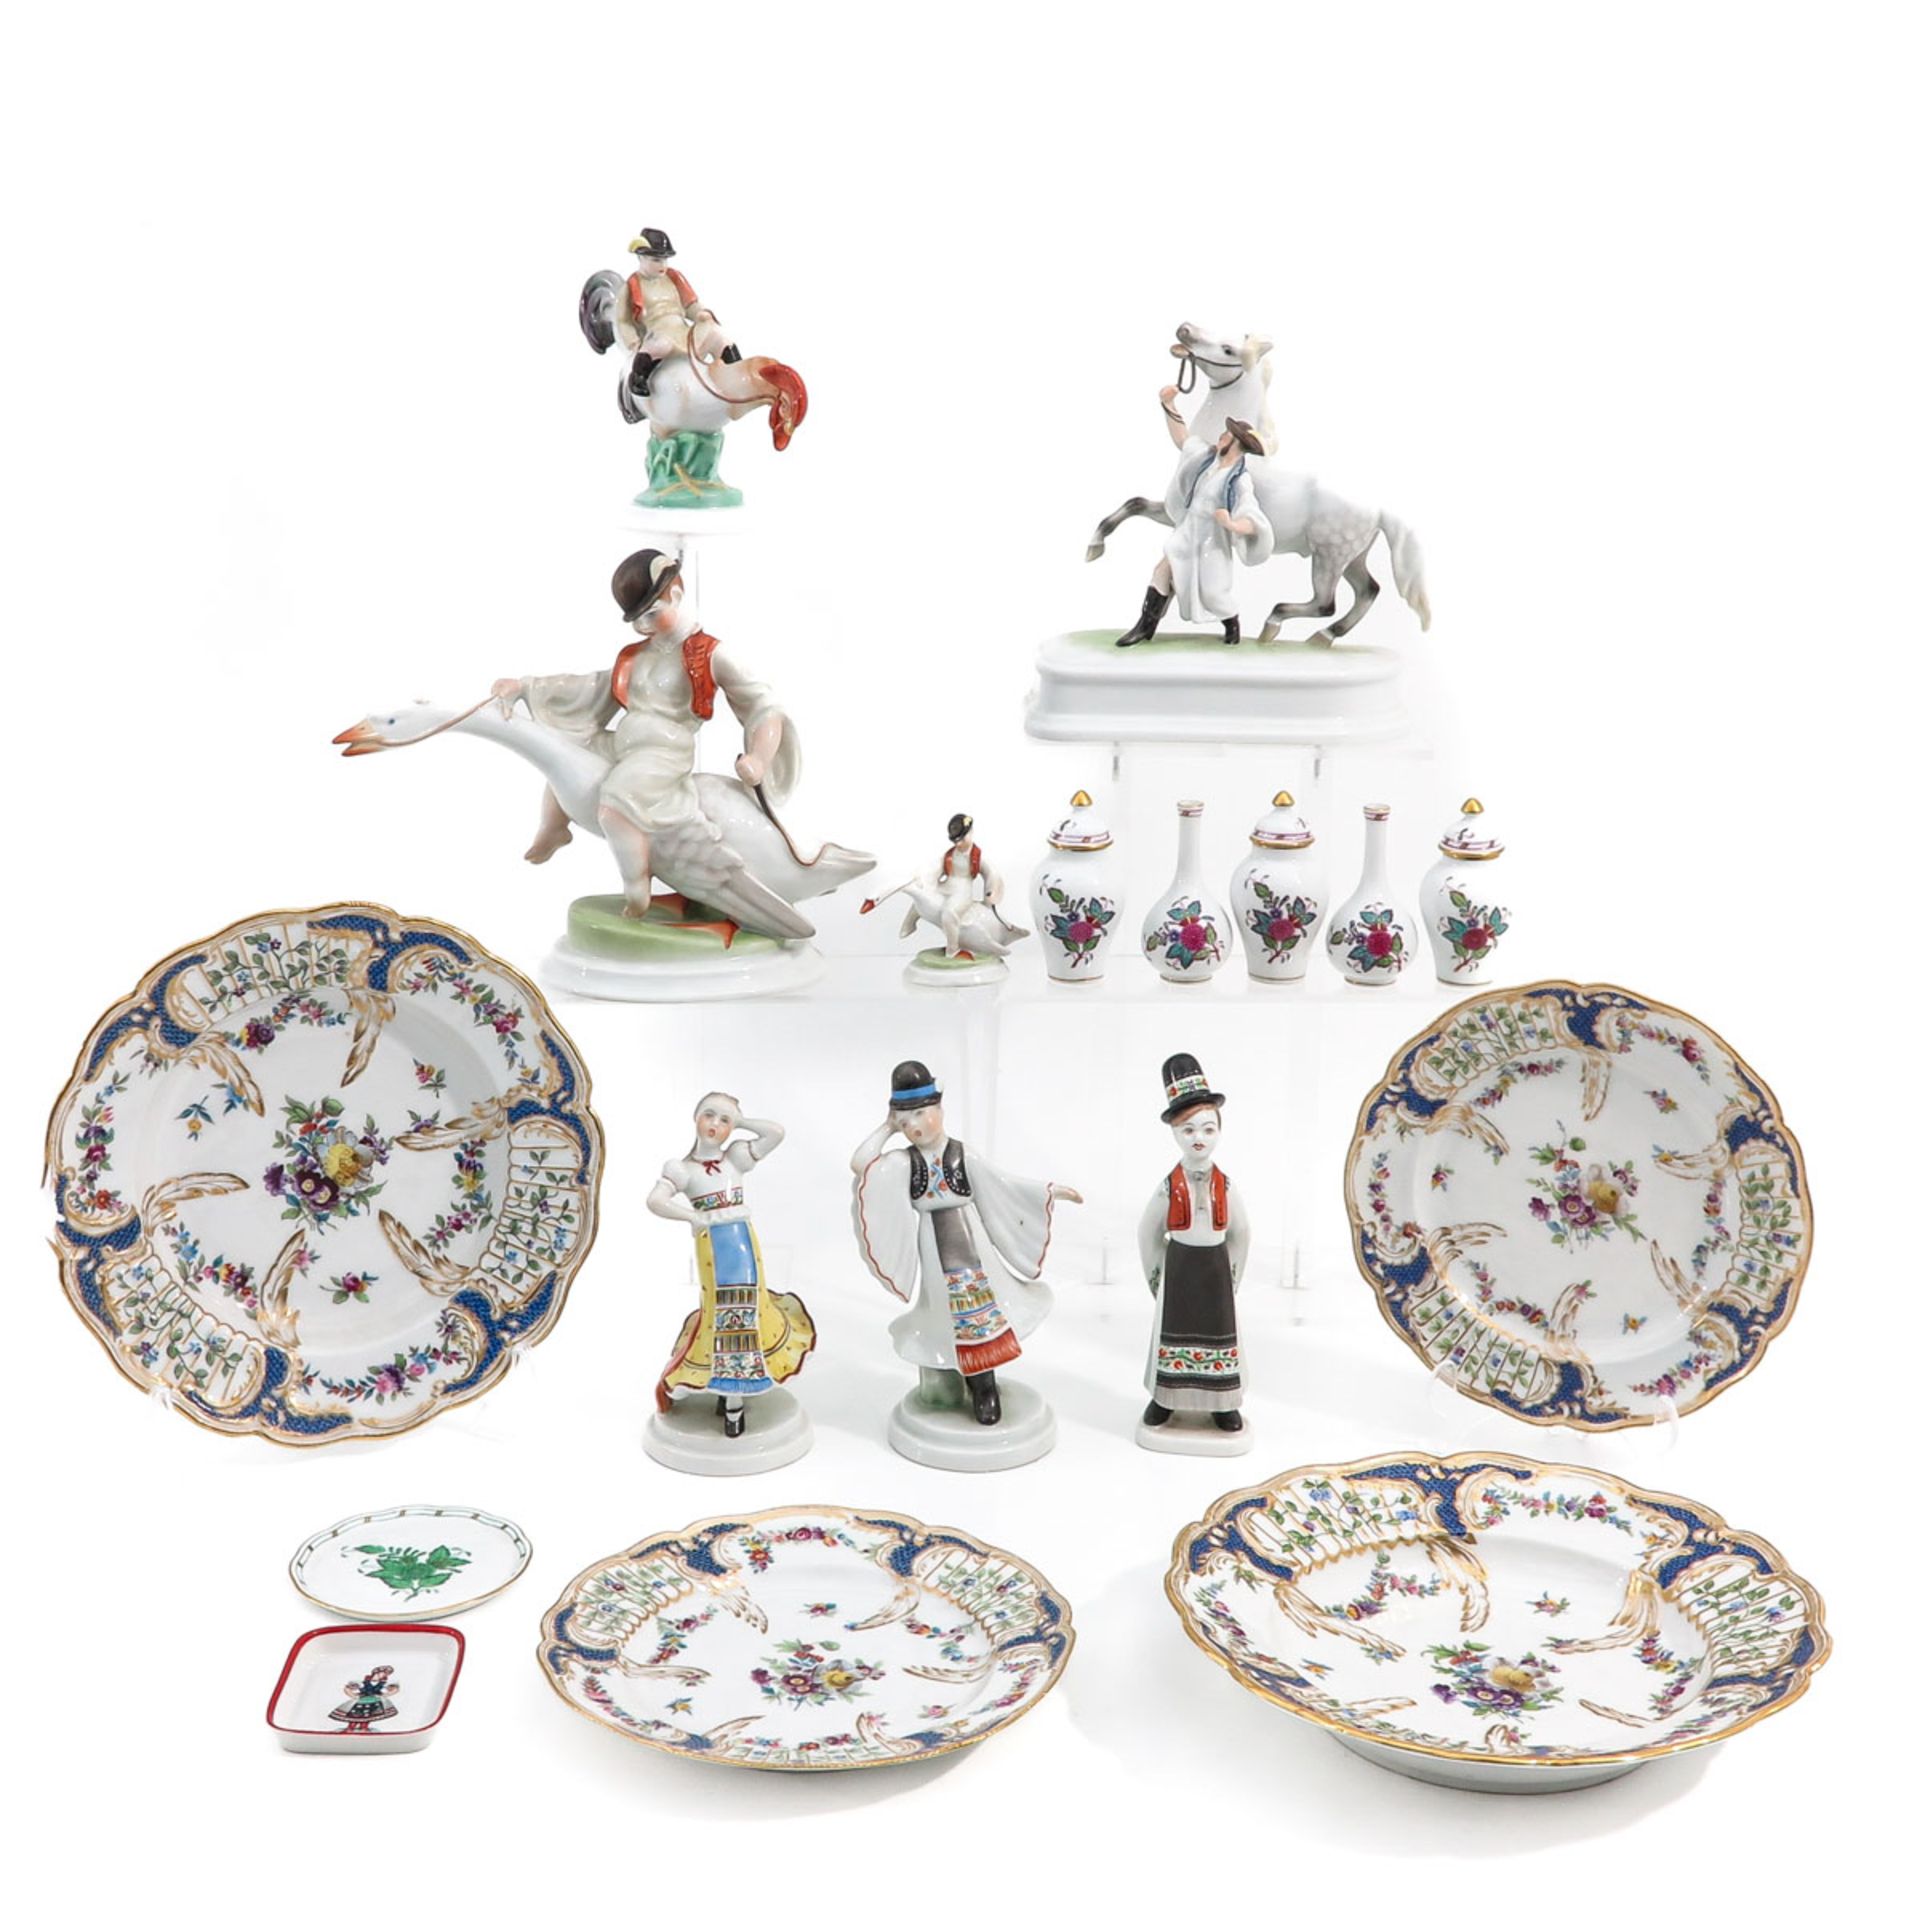 A Collection of Heren Hungary Porcelain